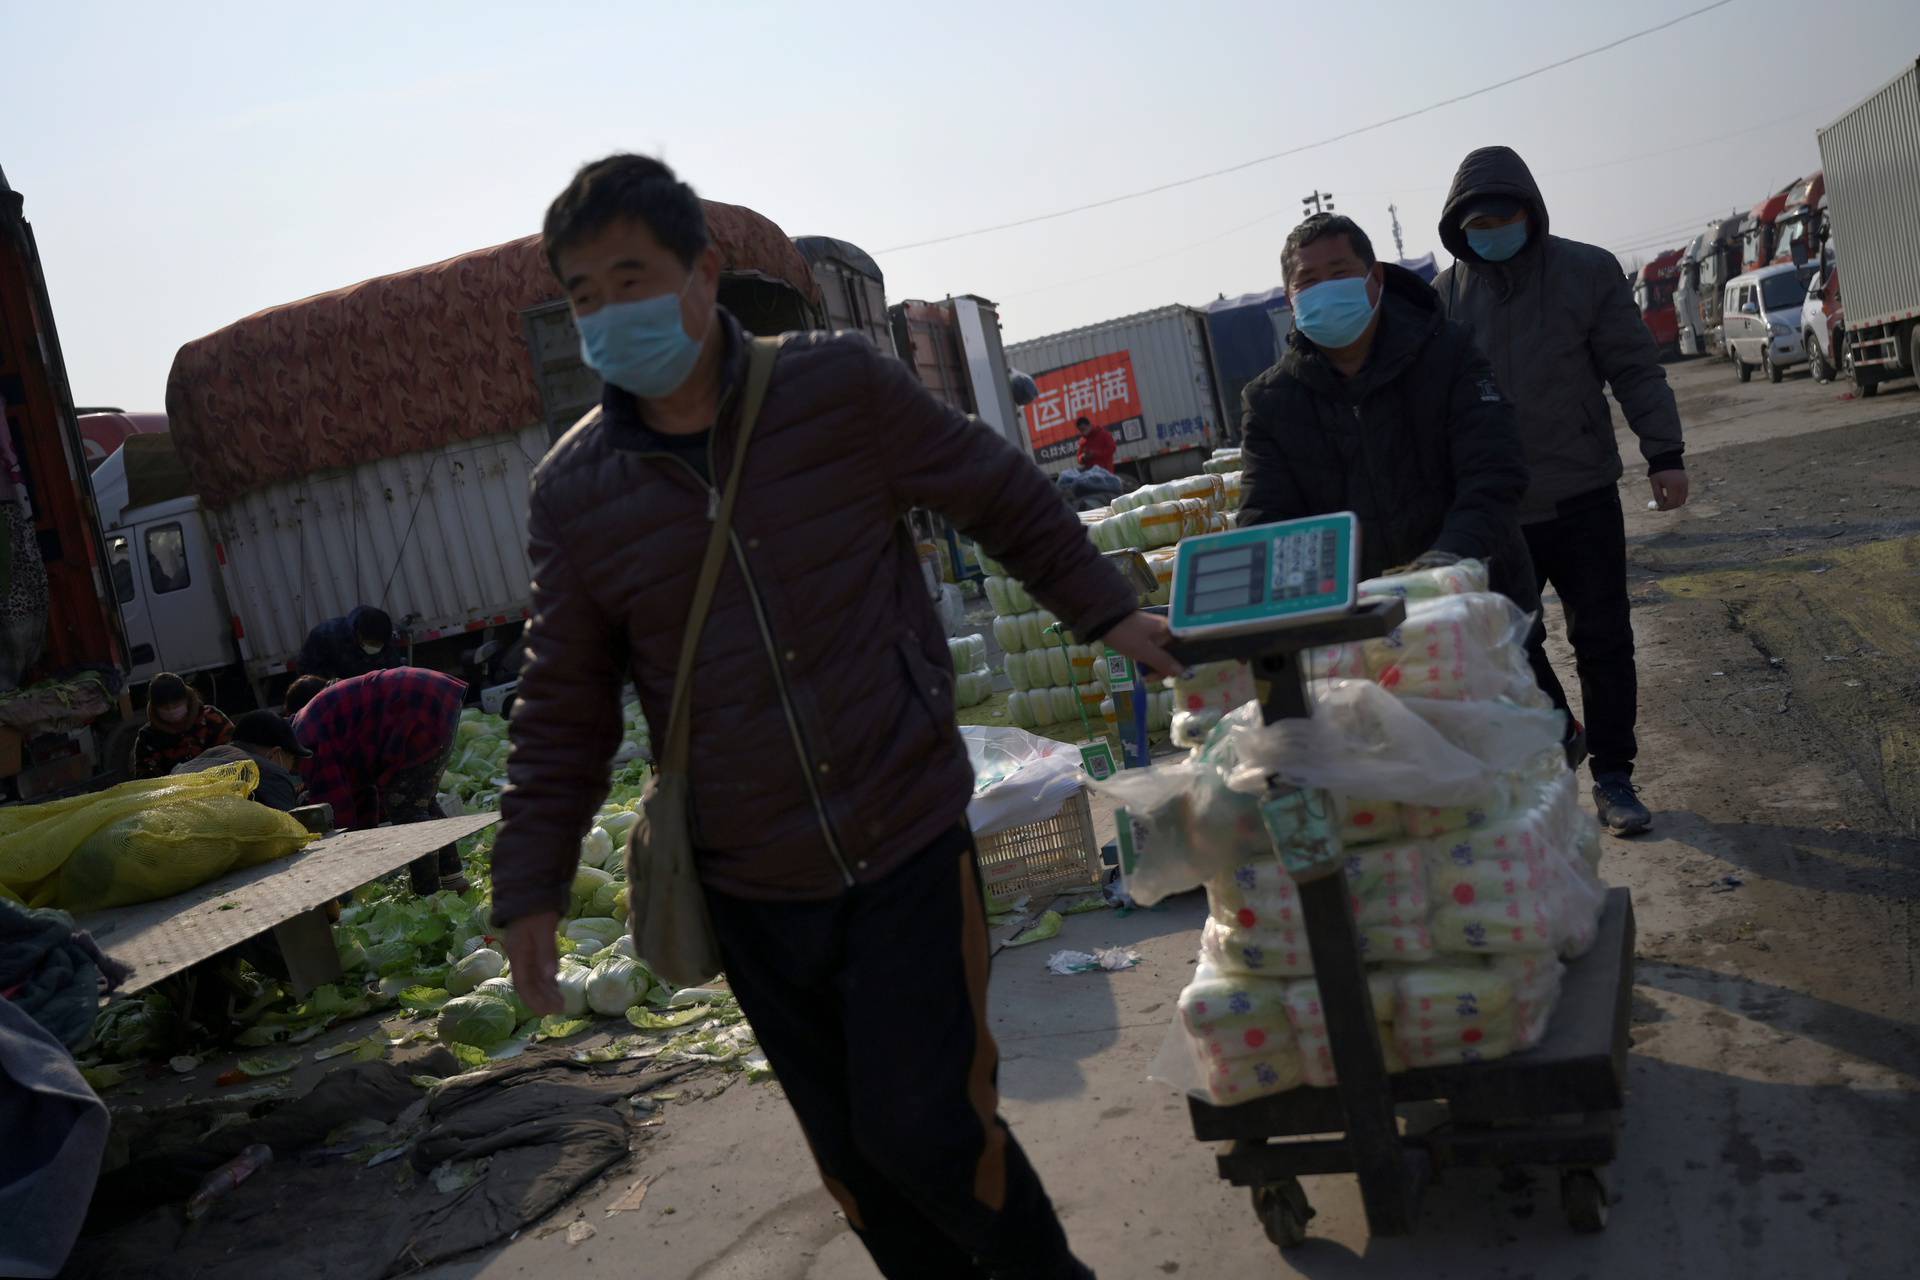 Men wearing face masks pull a cart carrying vegetables at the Xinfadi wholesale market, as the country is hit by an outbreak of the novel coronavirus disease (COVID-19), in Beijing